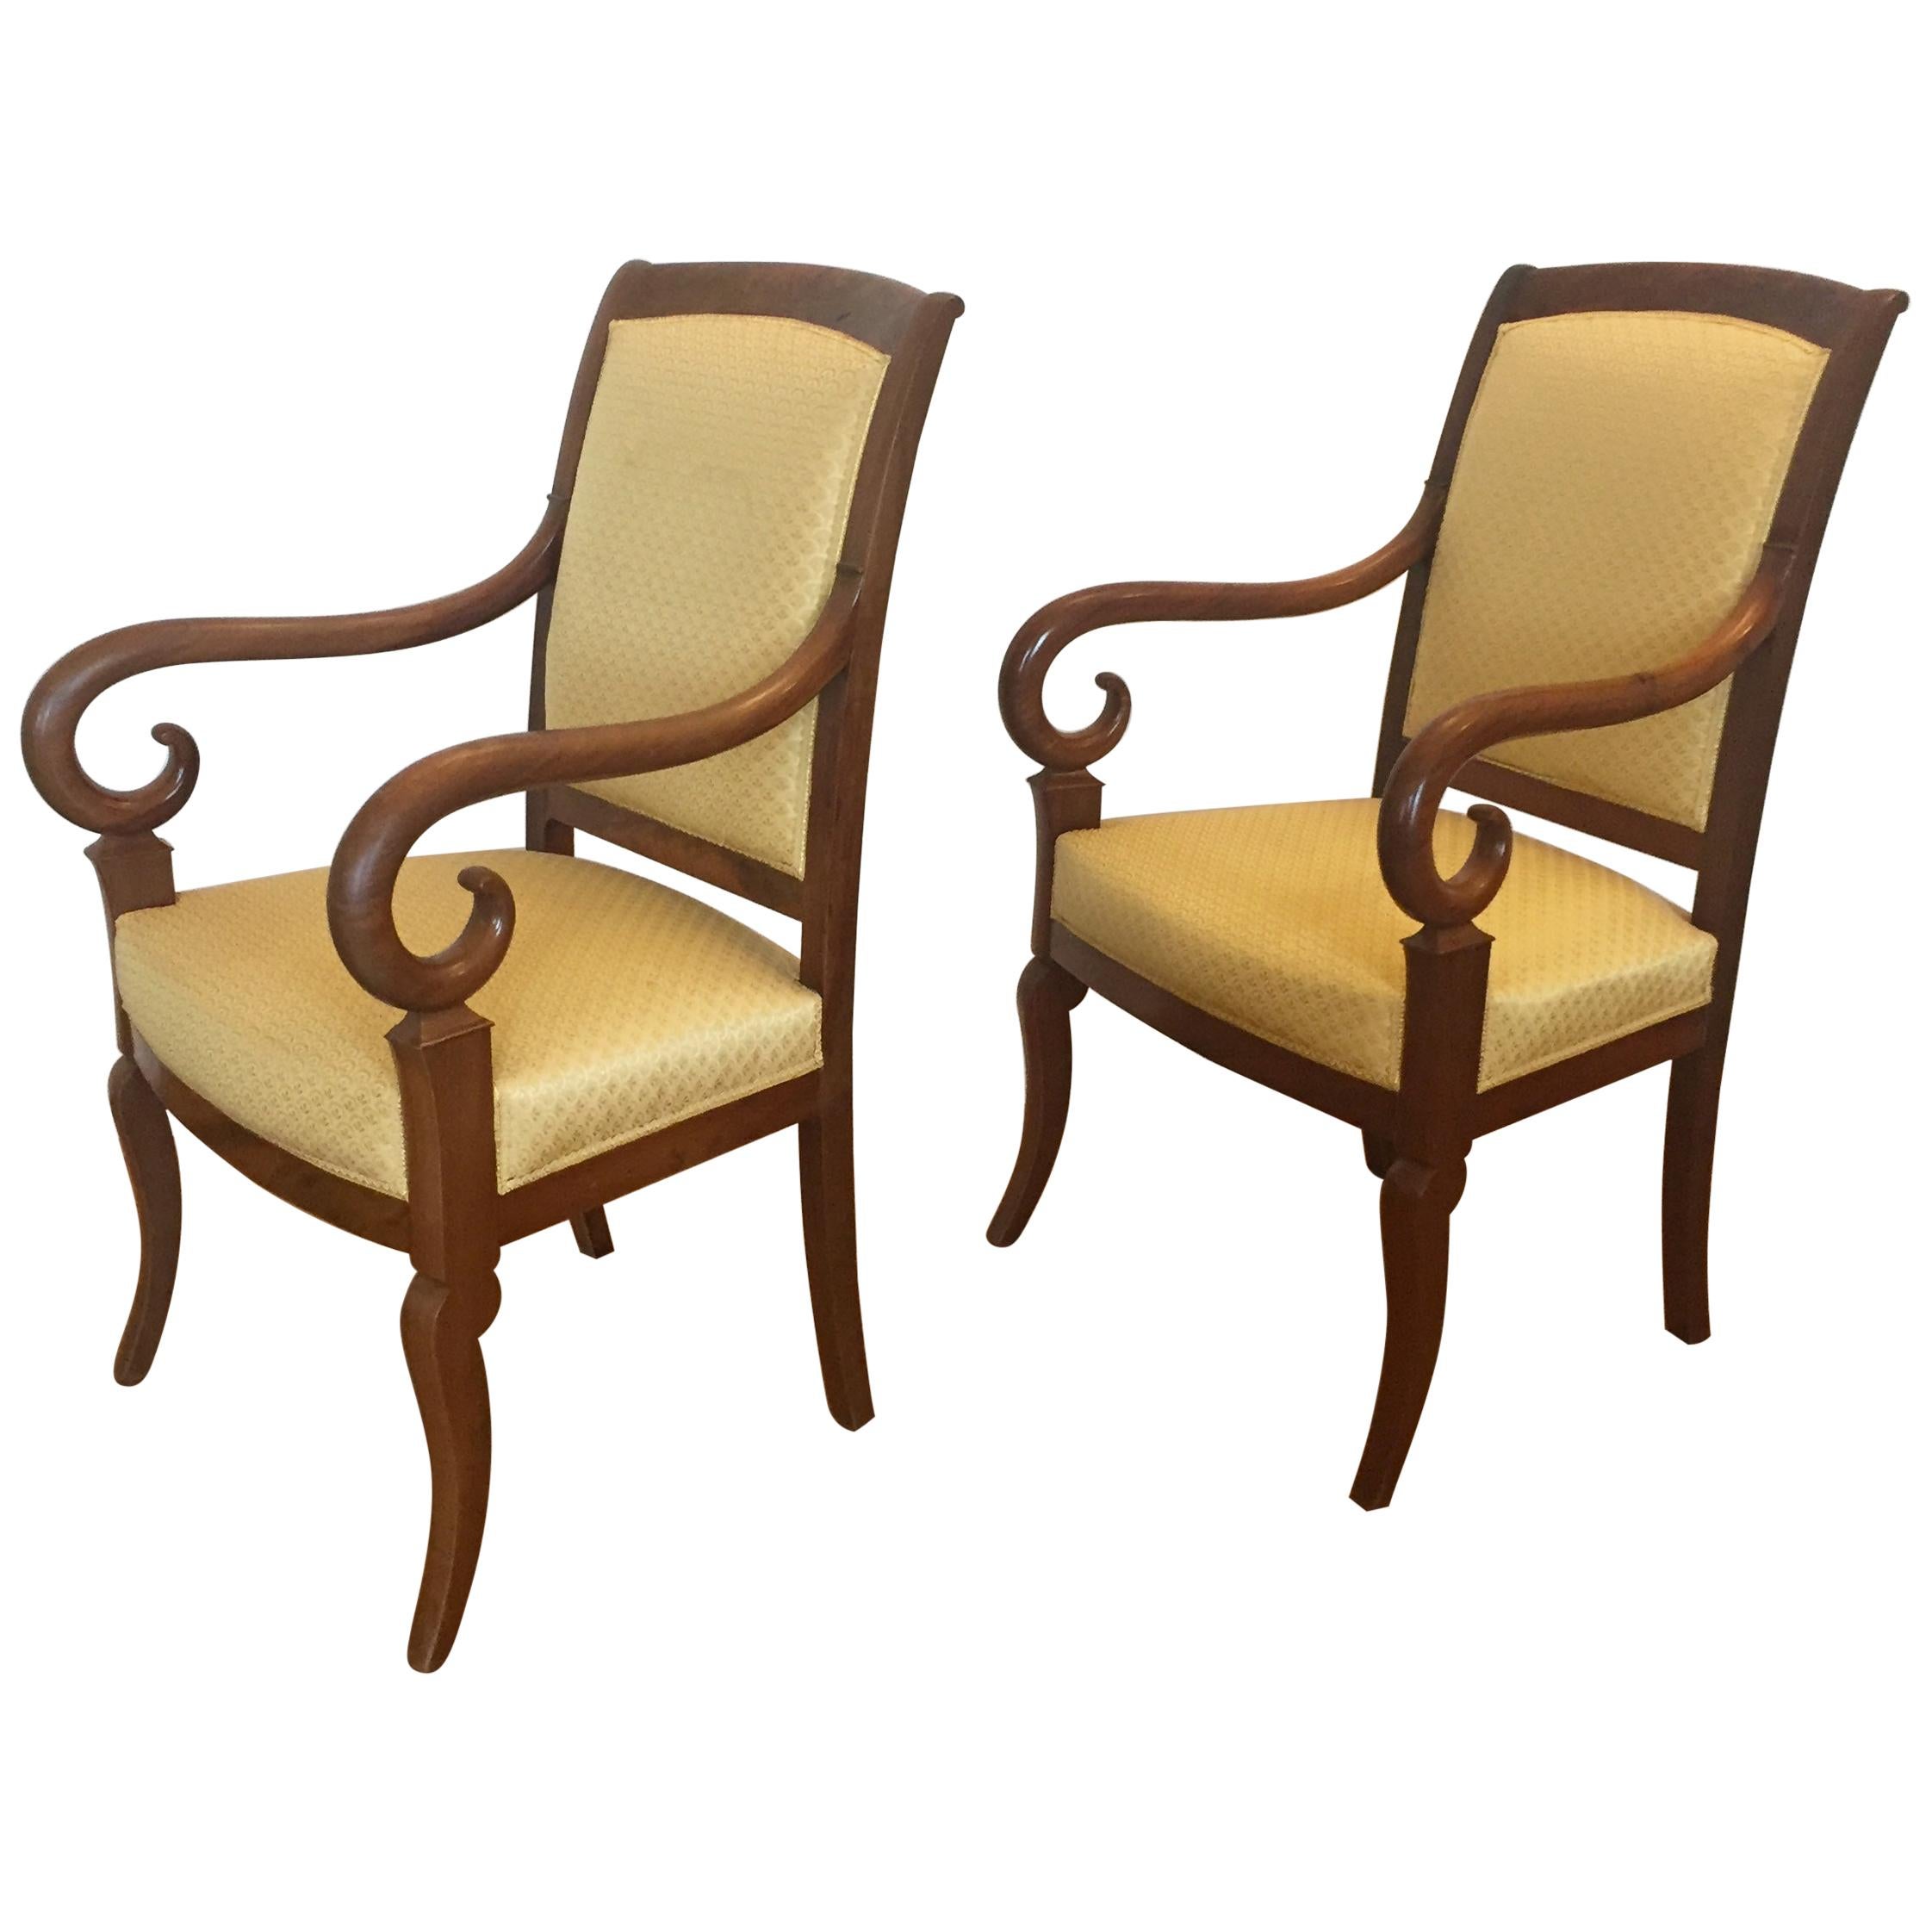 Pair of French Louis Phillipe Mahogany Armchairs Recovered in a Yellow Fabric For Sale